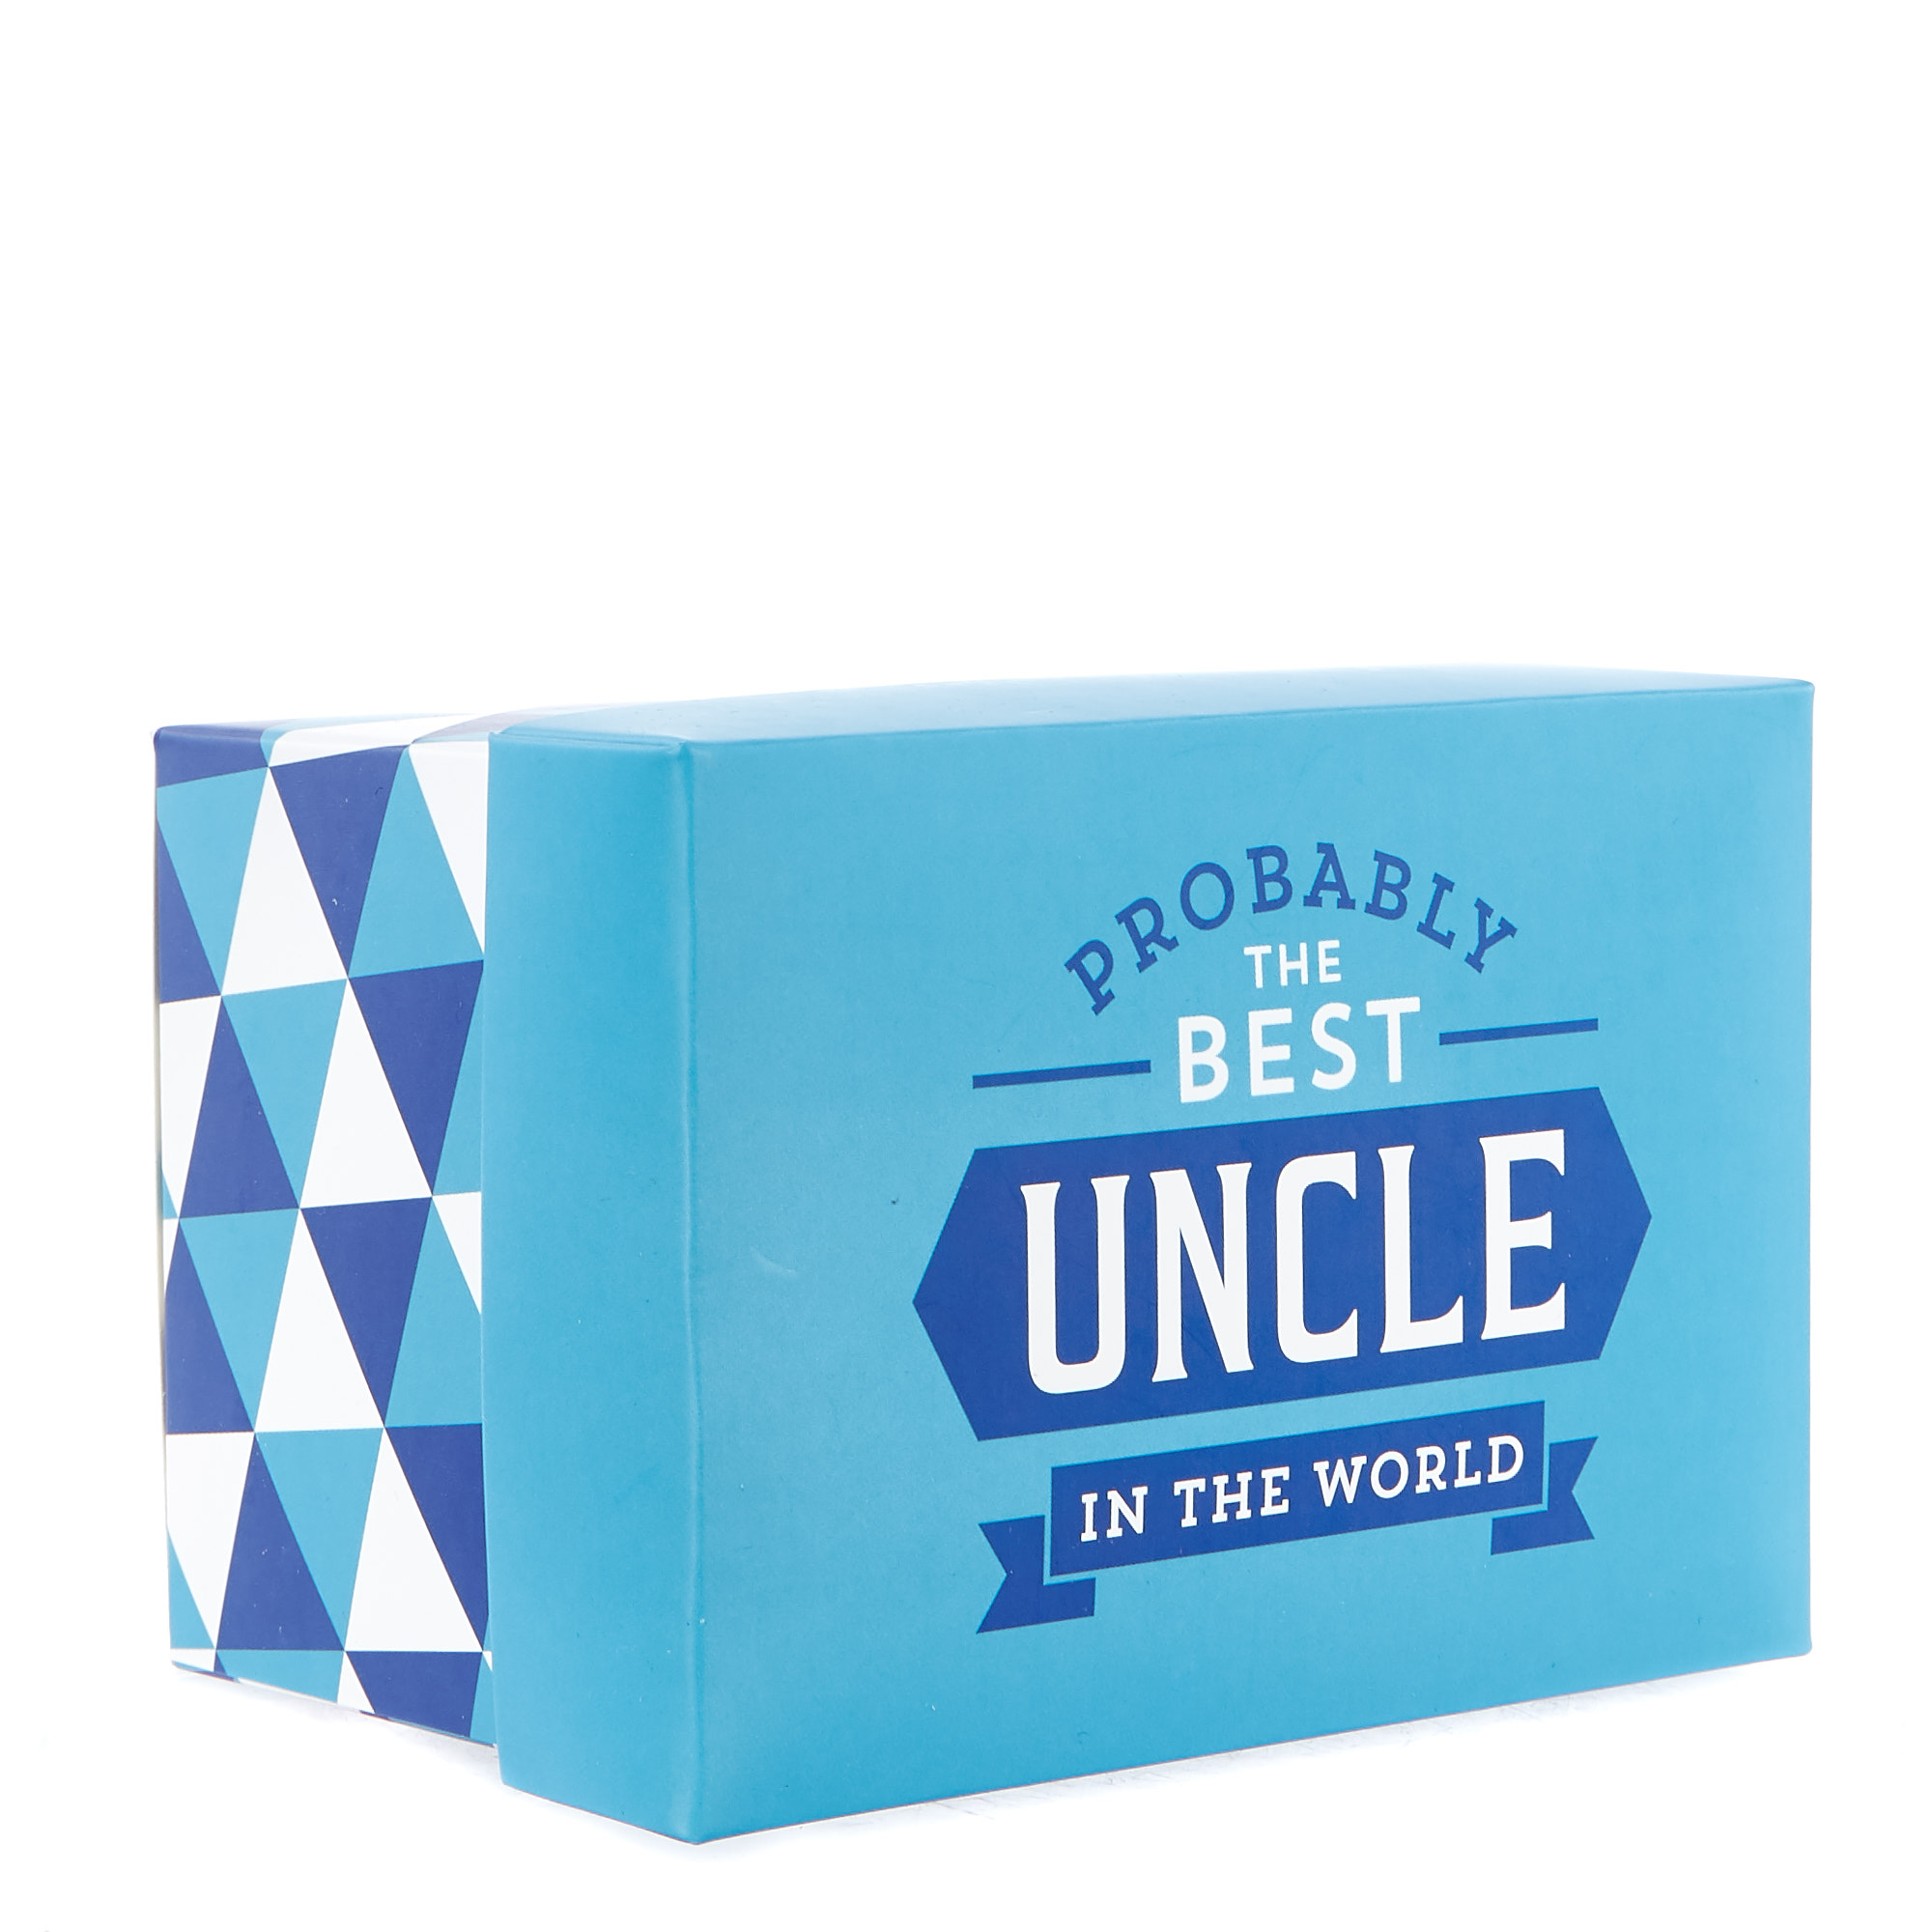 Buy Probably The Best Uncle" Mug" for GBP 3.99 Card